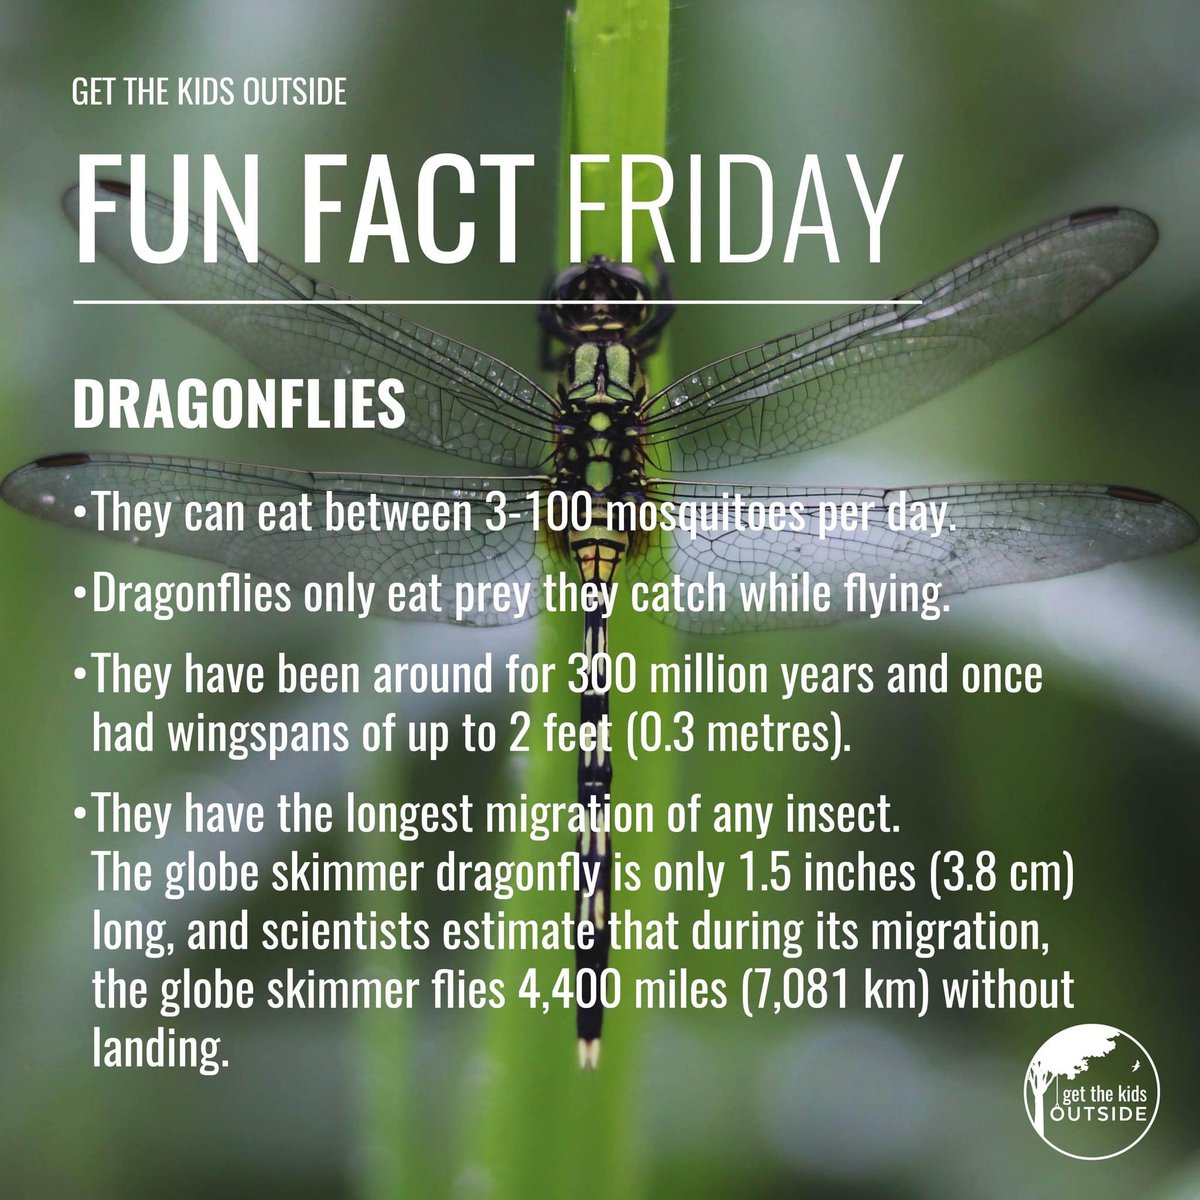 How much do you actually know about #dragonflies? 

Once you read that they can eat between 3-100 mosquitoes per day, they might just become your favourite  insect!⁠

 #fridayfunfact #insectfunfacts #dragonflies #learnaboutnature #getthekidsoutside #funfactfriday